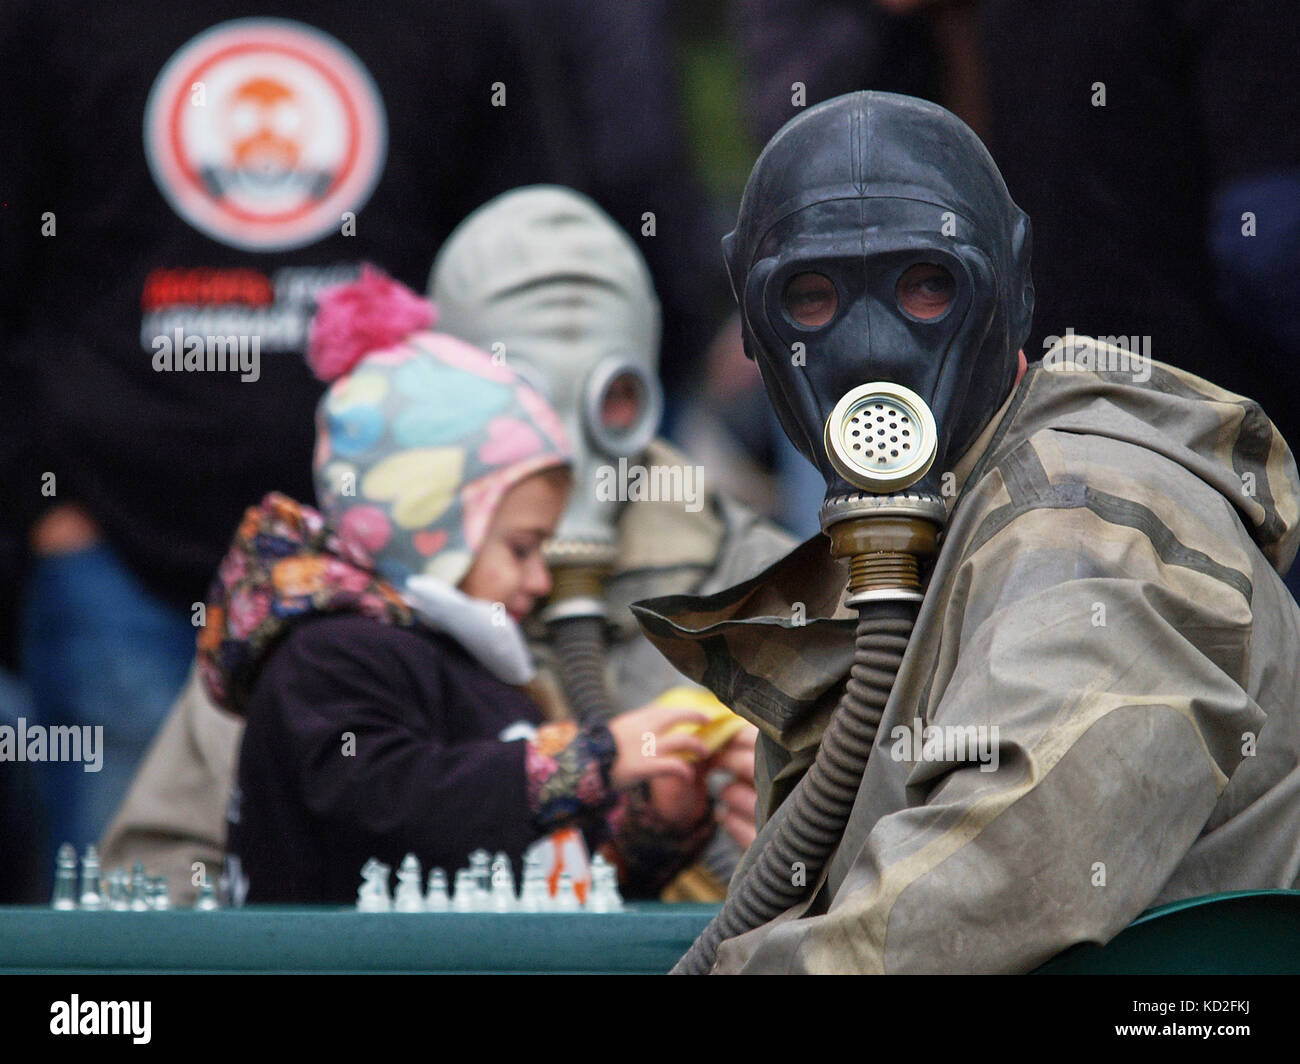 Kryvyi Rih, Ukraine - October 9, 2017: Man wearing black gas mask with little girl playing chess next to father during protest meeting near the ArcelorMittal Kryvyi Rih PJSC claim to reduce air pollution and conduct an independent audit of cleaning equipement at steel factory Credit: Dmytro Aliokhin/Alamy Live News Stock Photo